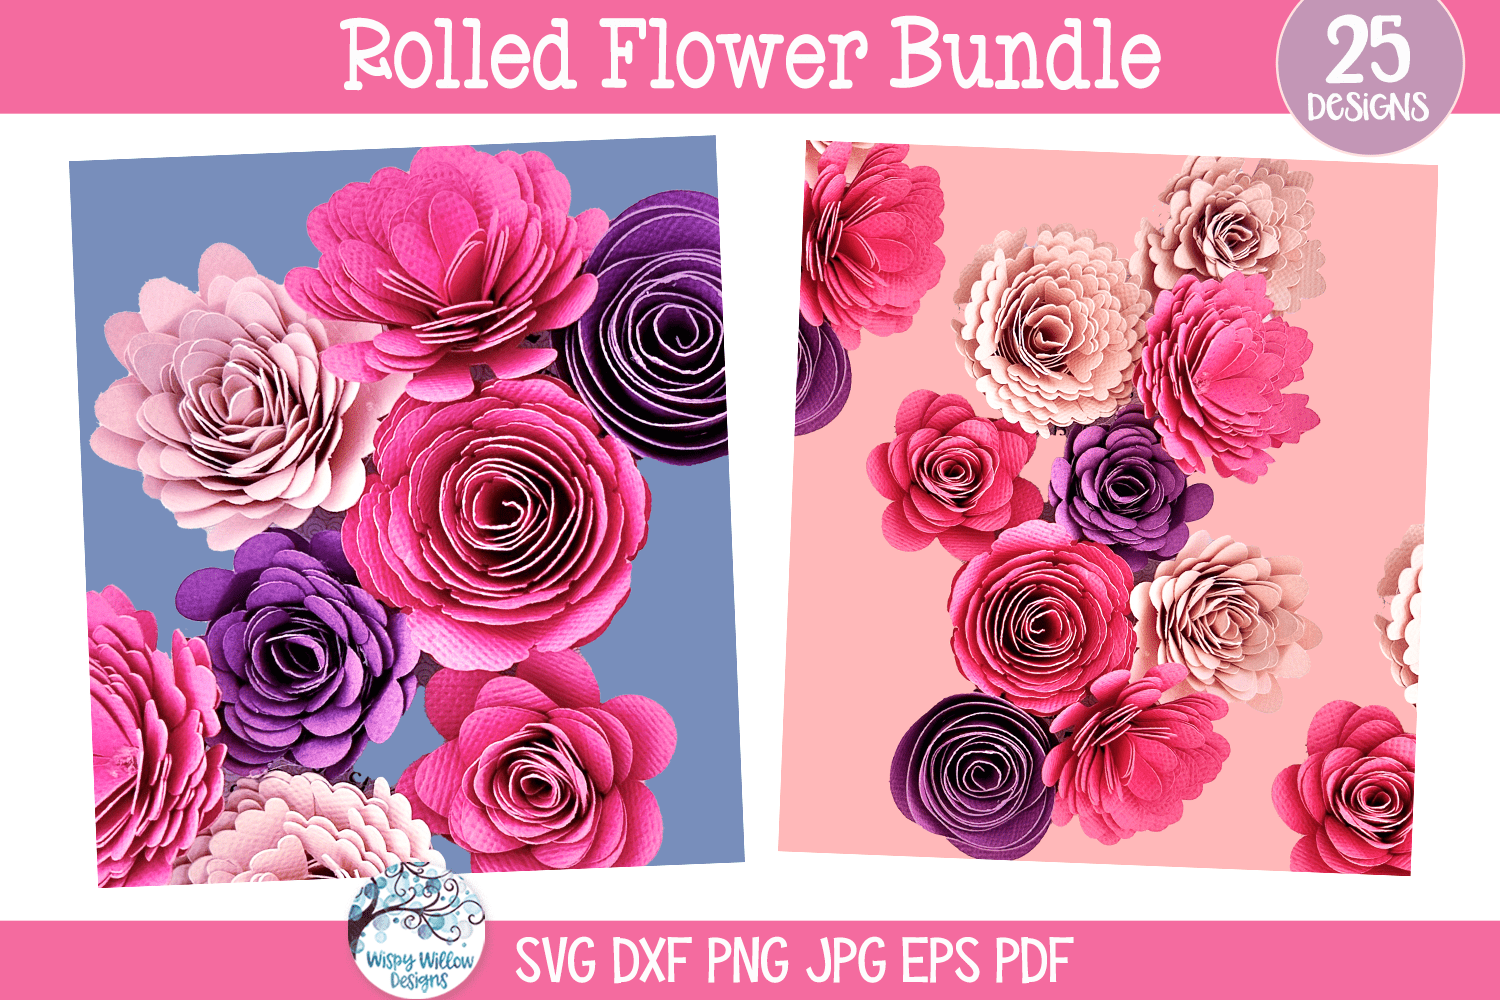 Rolled Flowers SVG Bundle | Intricate Floral Cut 3D Designs Wispy Willow Designs Company